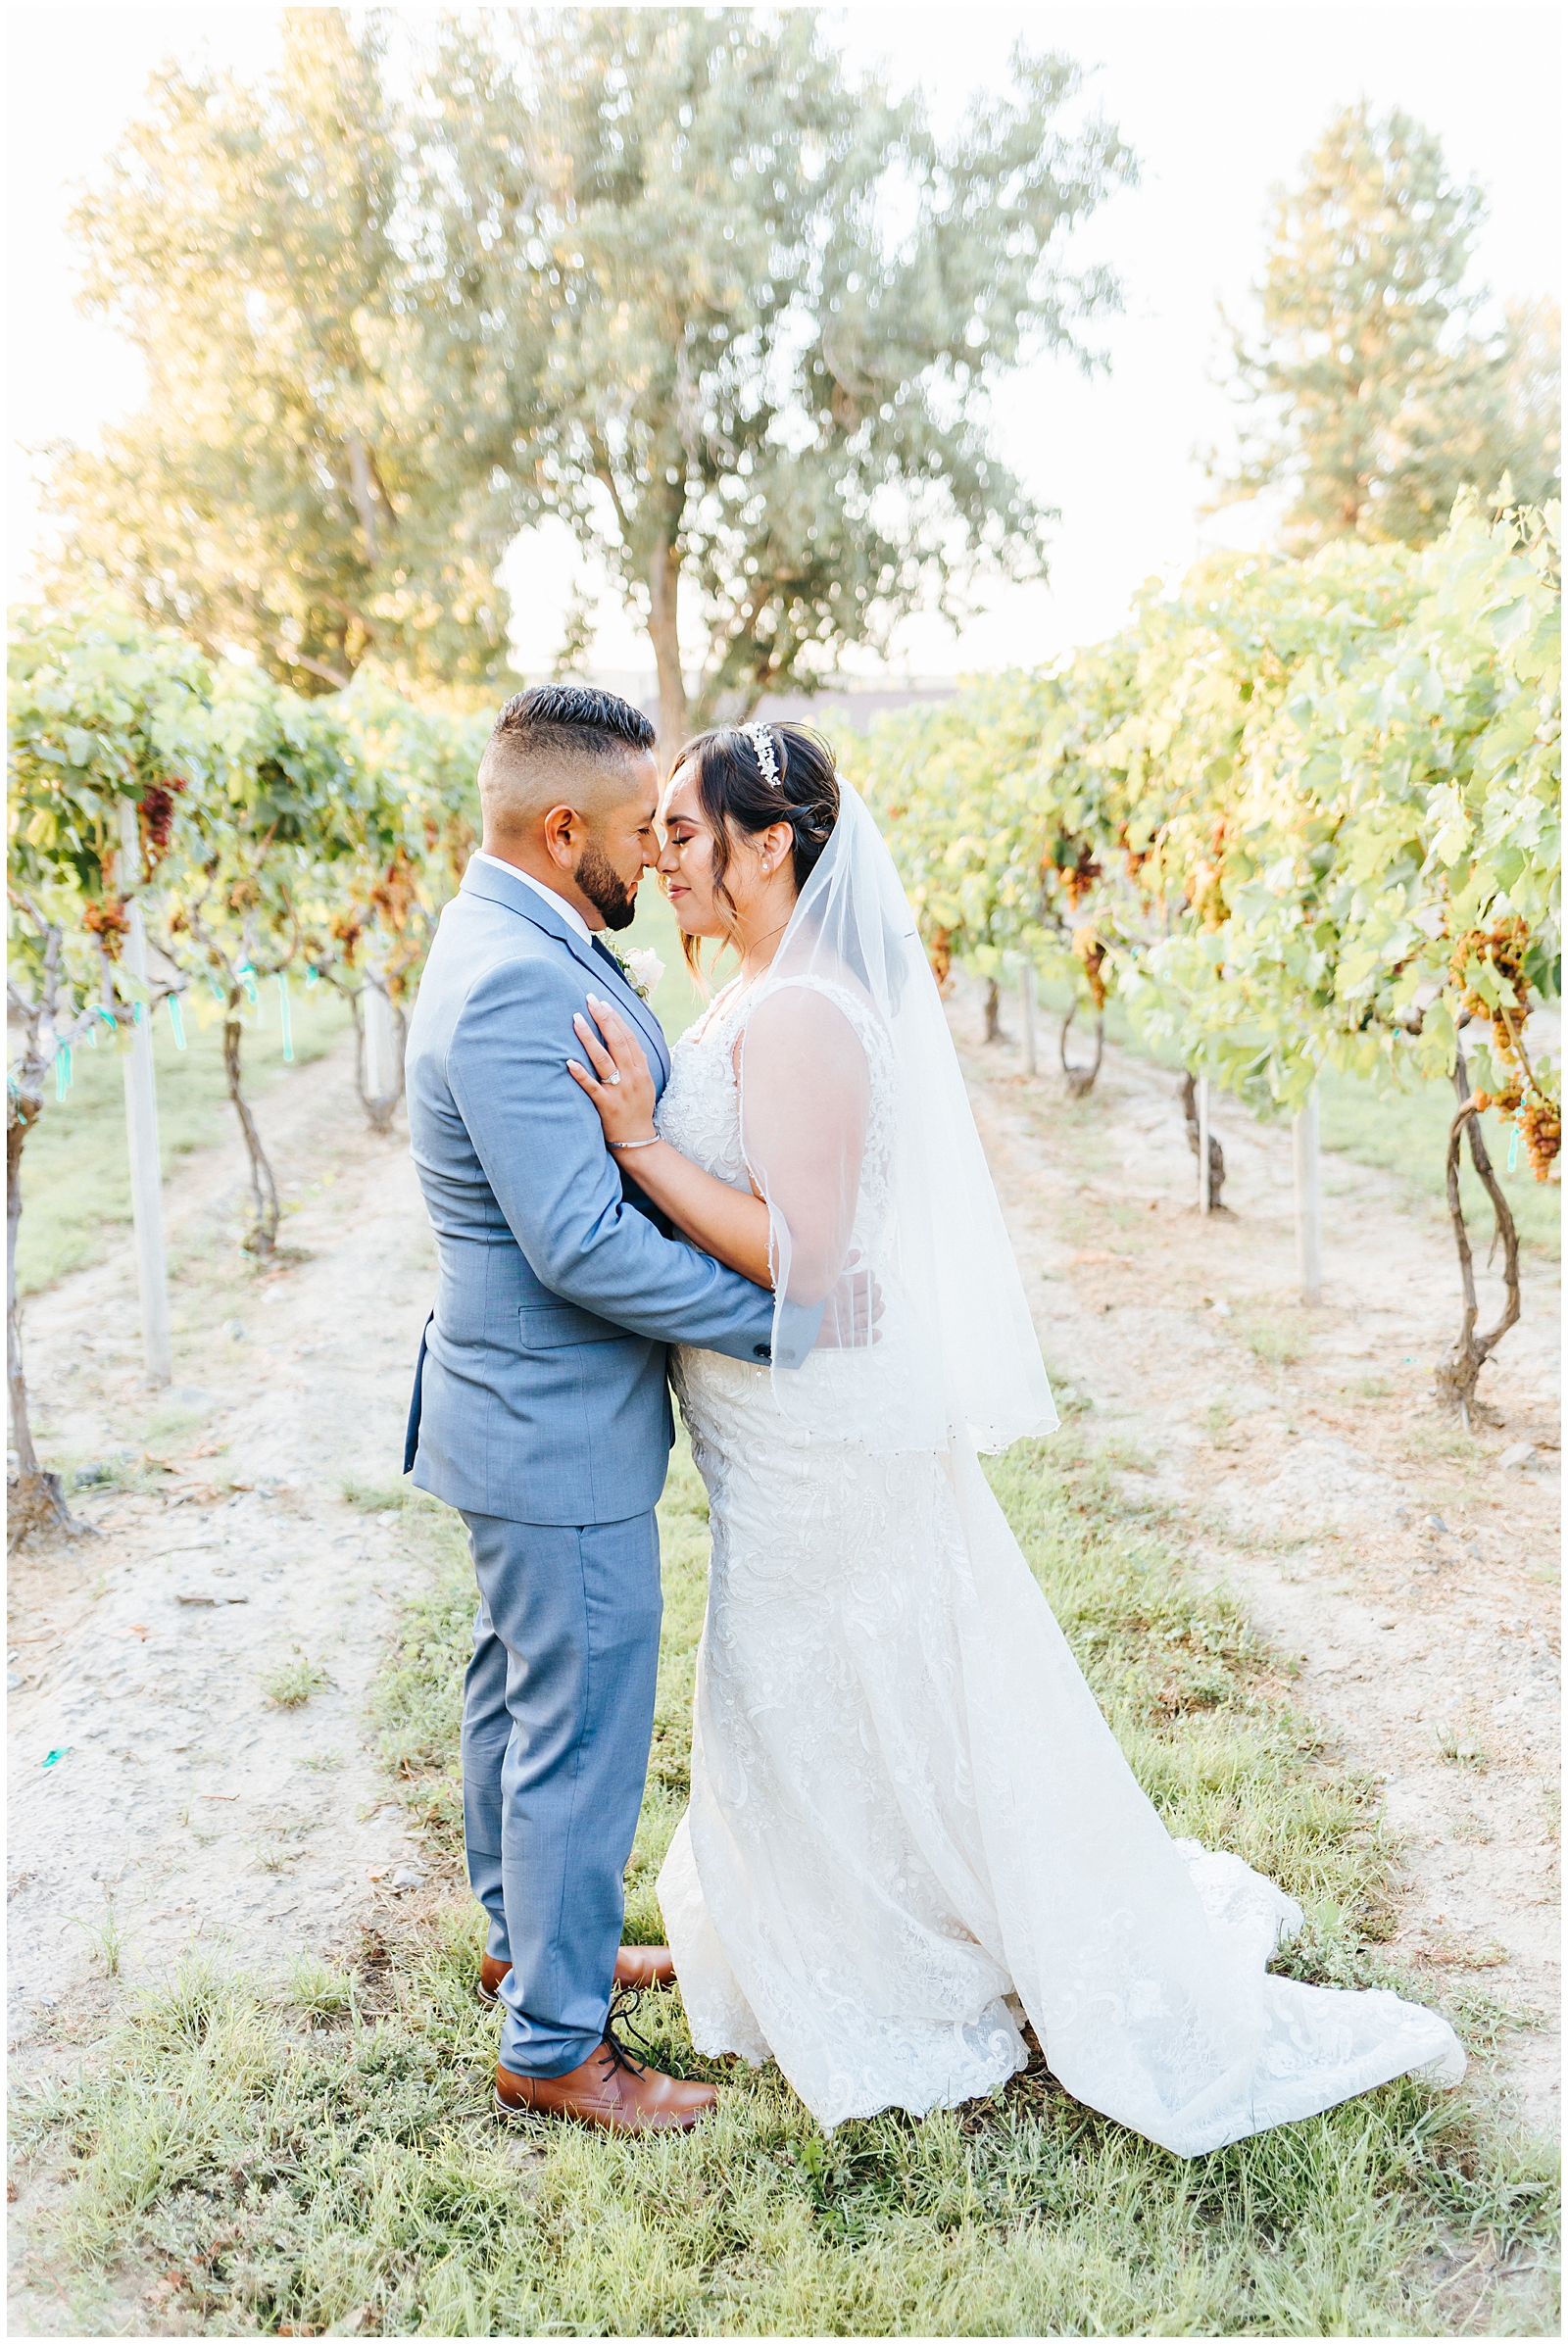 Dusty Blue Fox Canyon Vineyards Wedding Portraits of the Bride and Groom at Golden Hour